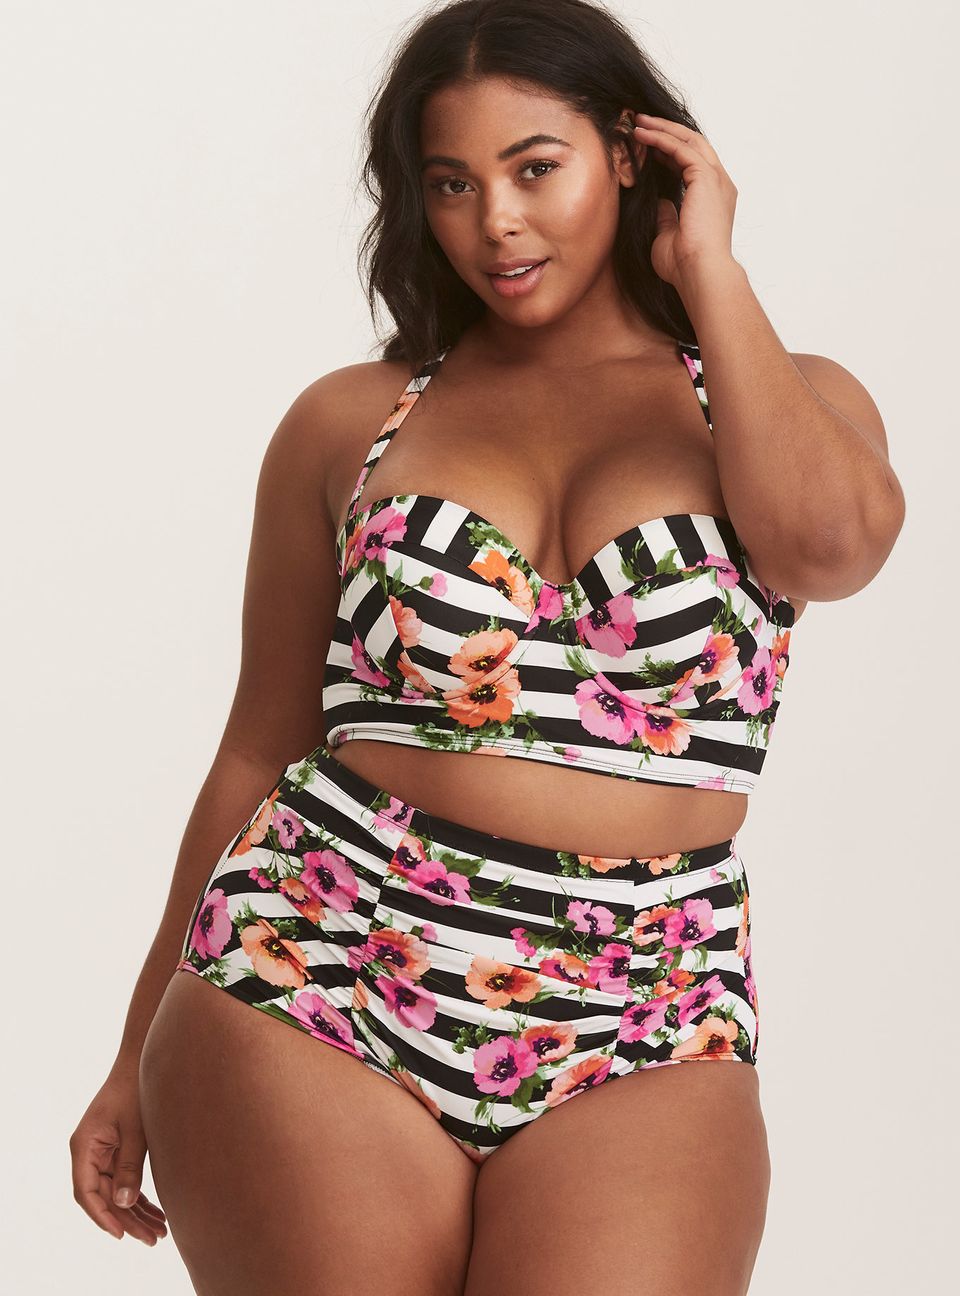 These Stunning Plus-Size Swimsuits With Underwire Are Here To Lift You Up